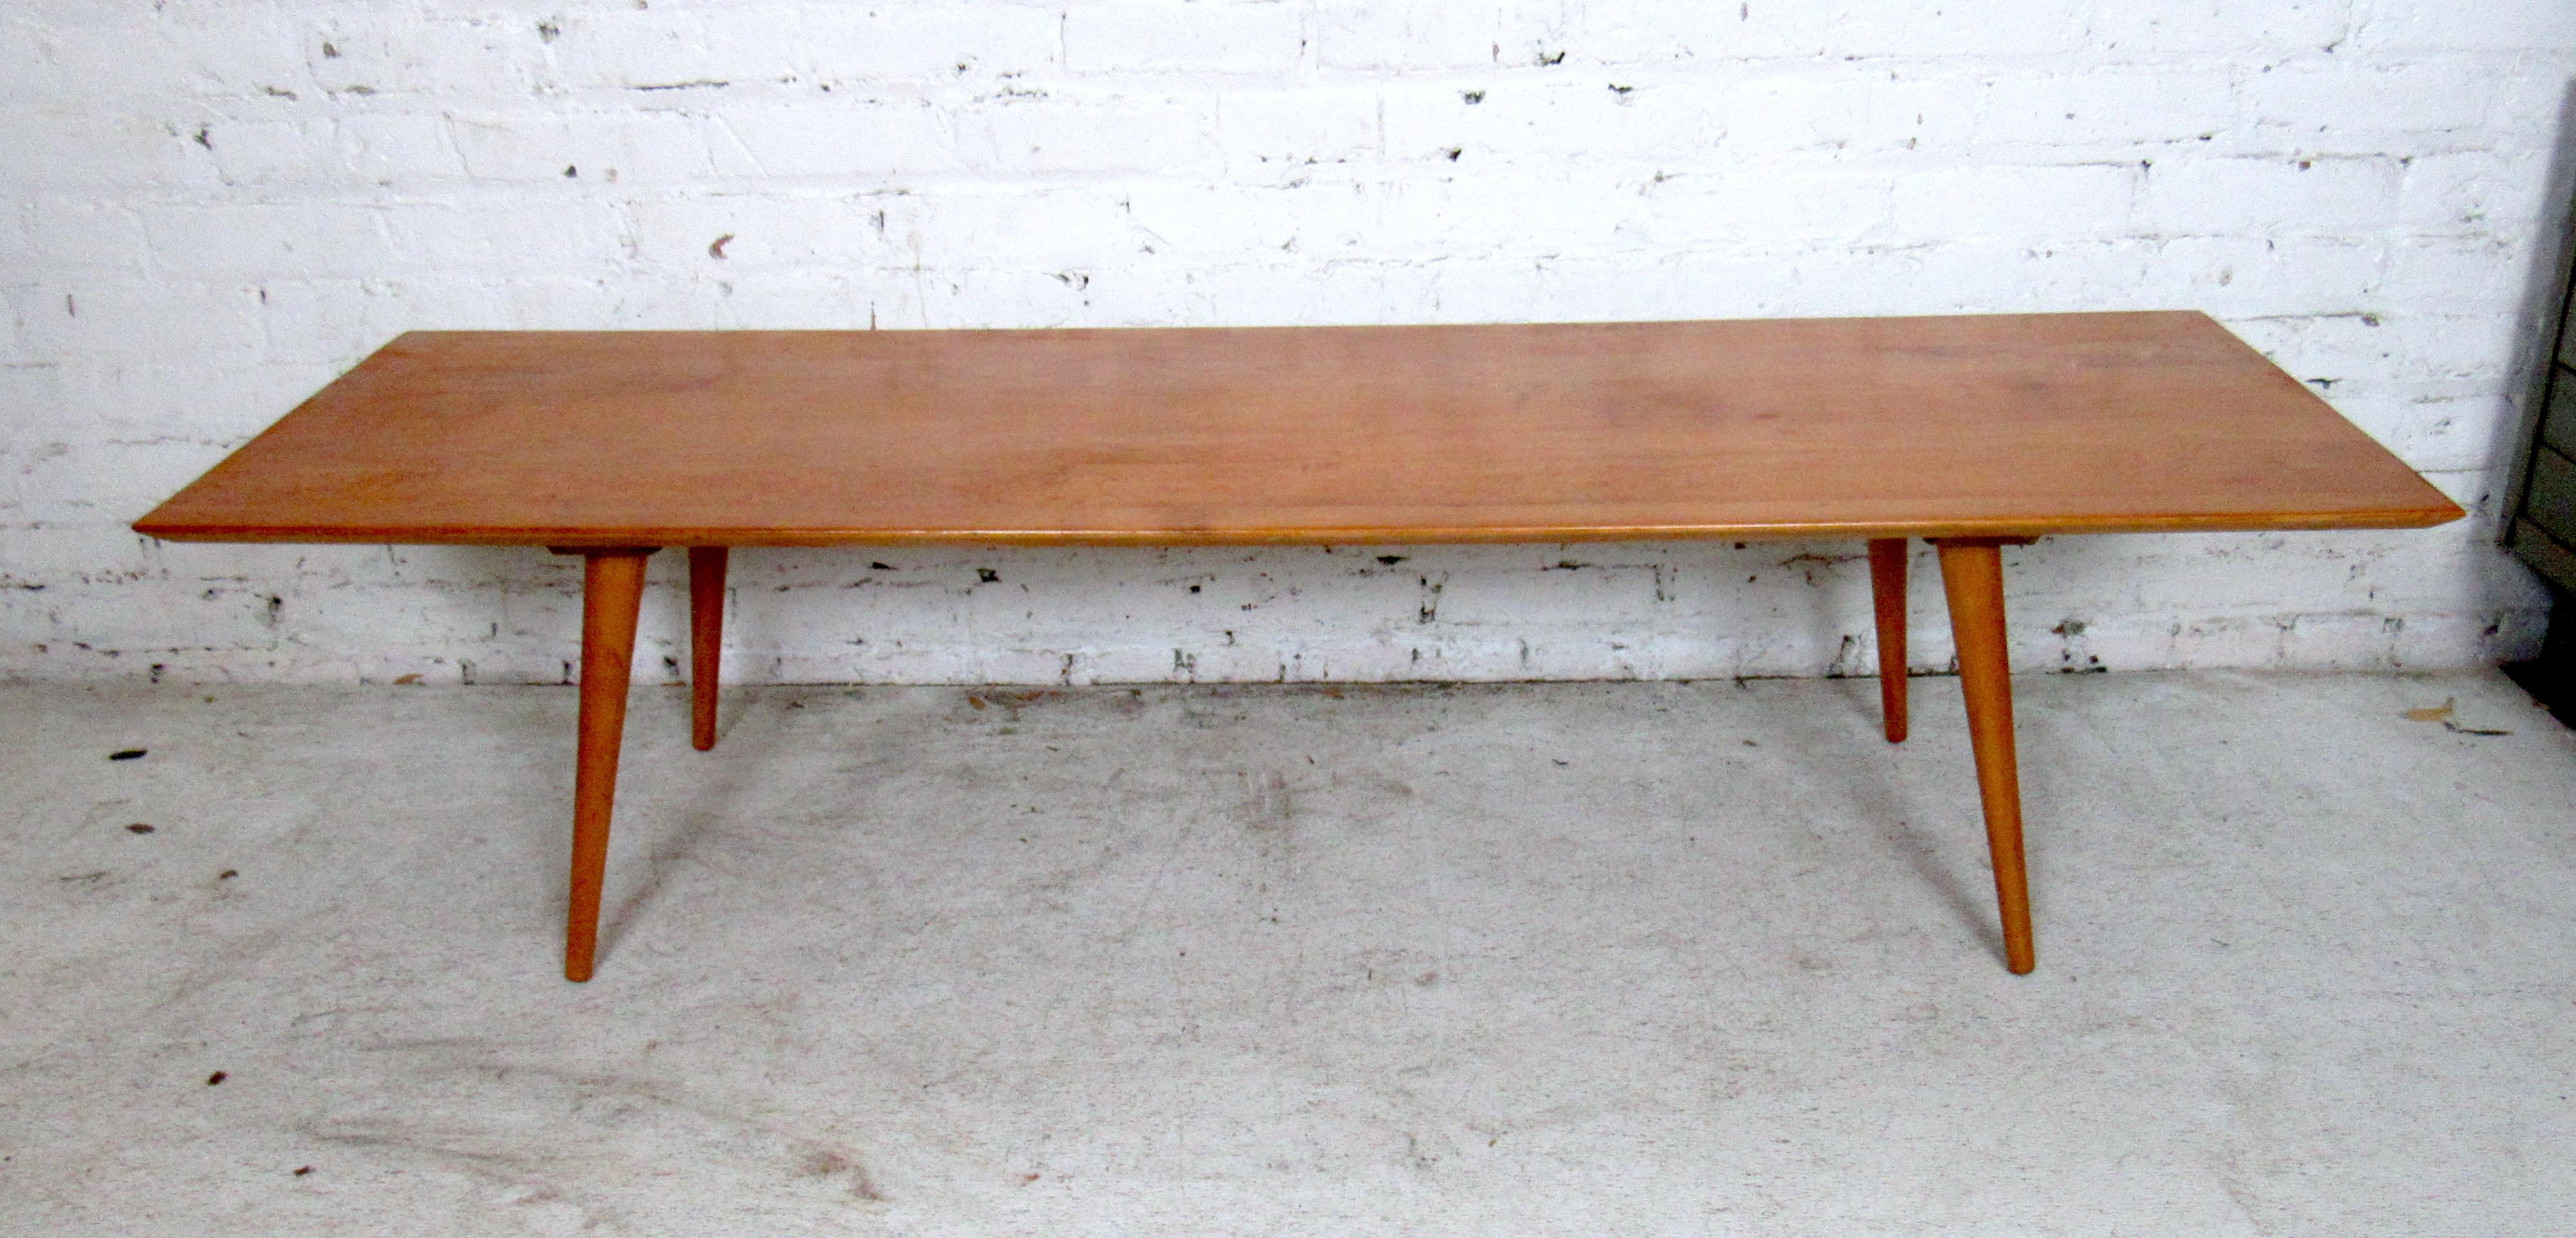 Vintage modern coffee table by Paul McCobb features an elongated rectangle top with splayed tapered legs.

Please confirm the item location (NY or NJ).